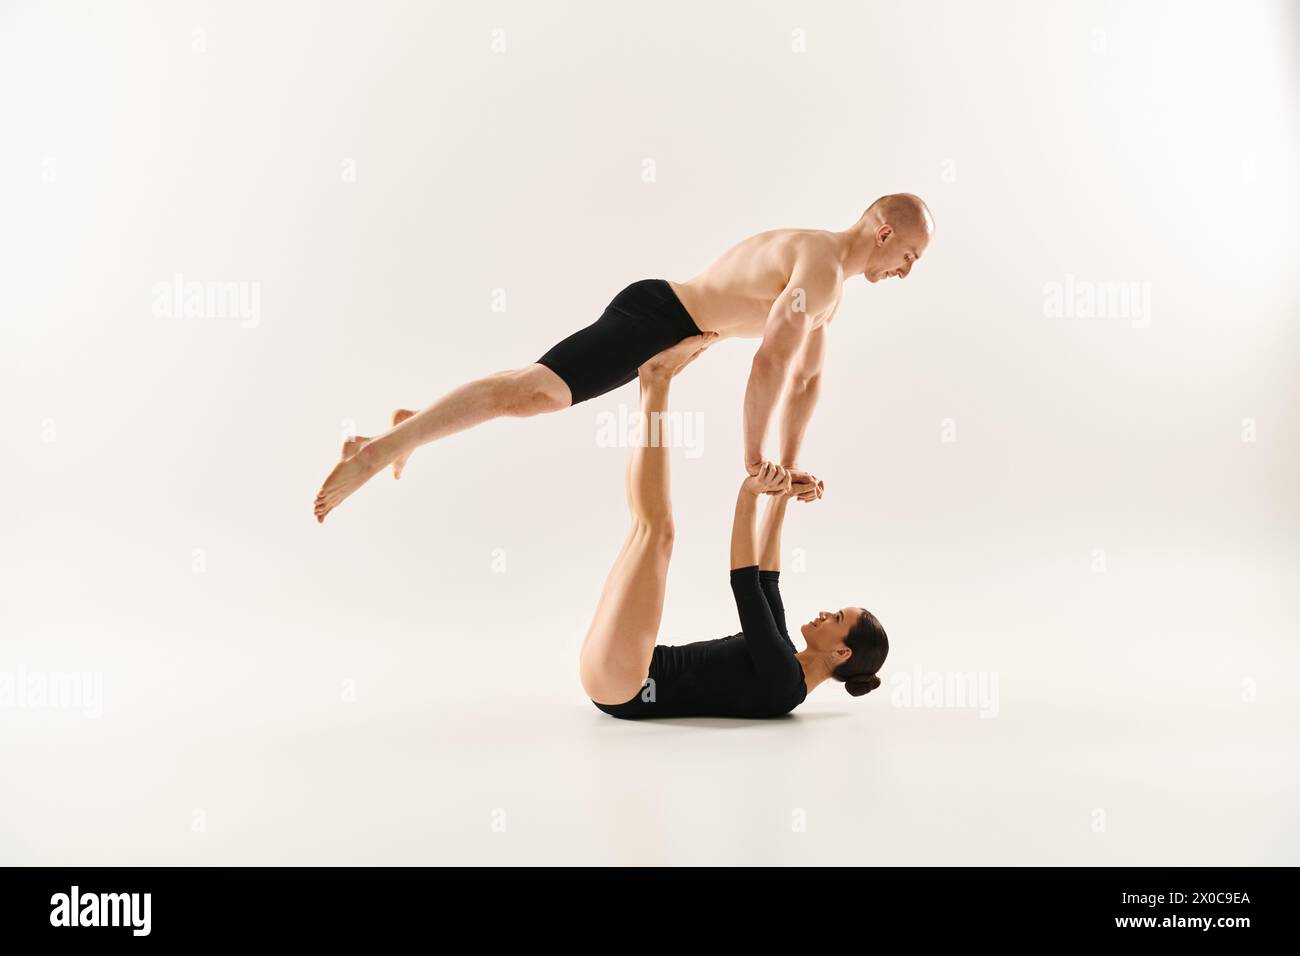 A man gracefully balances on woman hands in a stunning handstand display, showcasing strength and coordination. Stock Photo